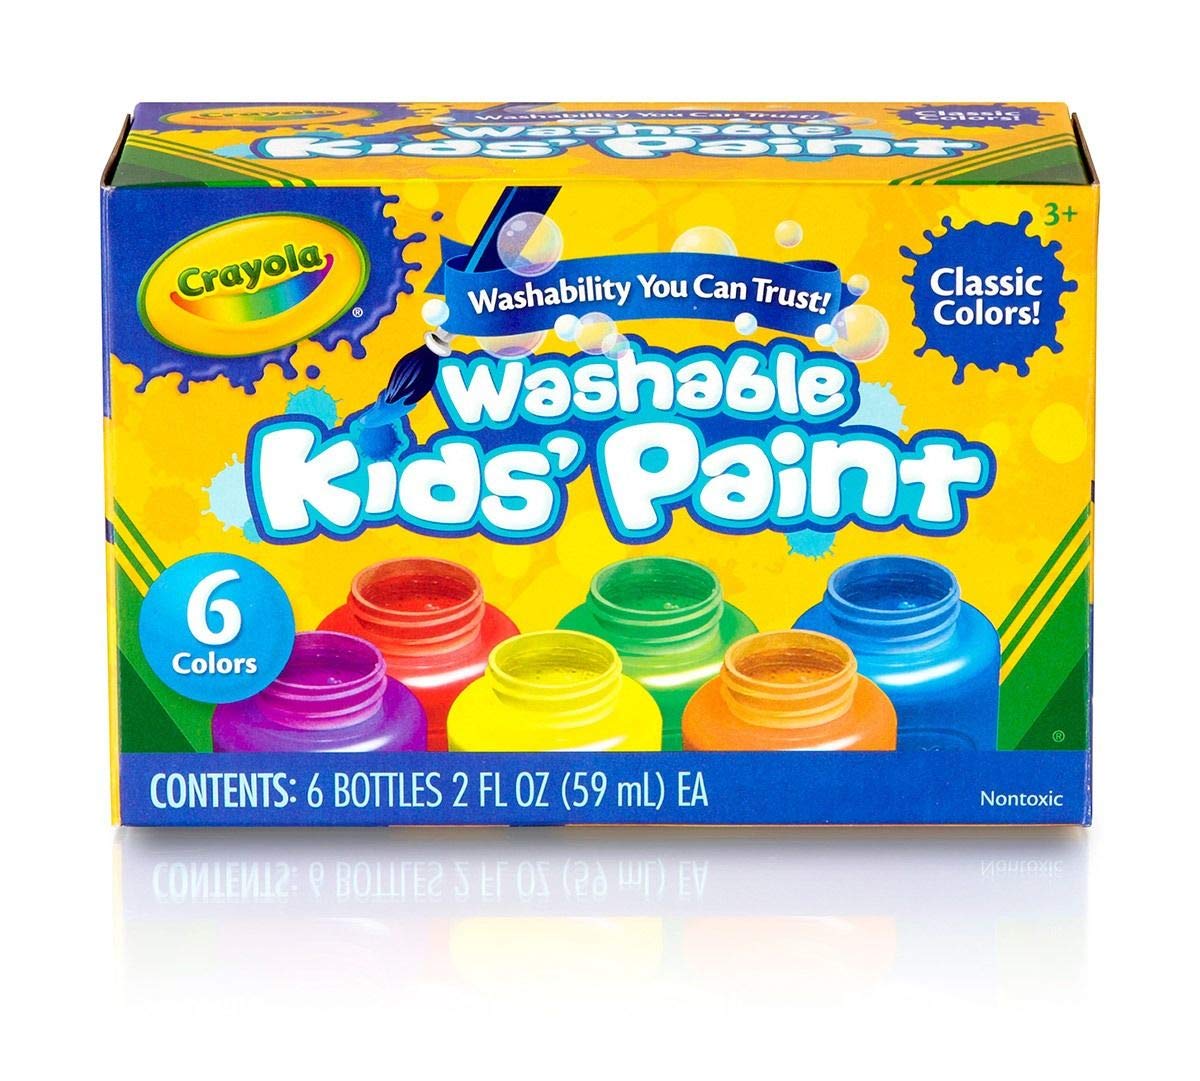 The Best Paint For Kids February 2021